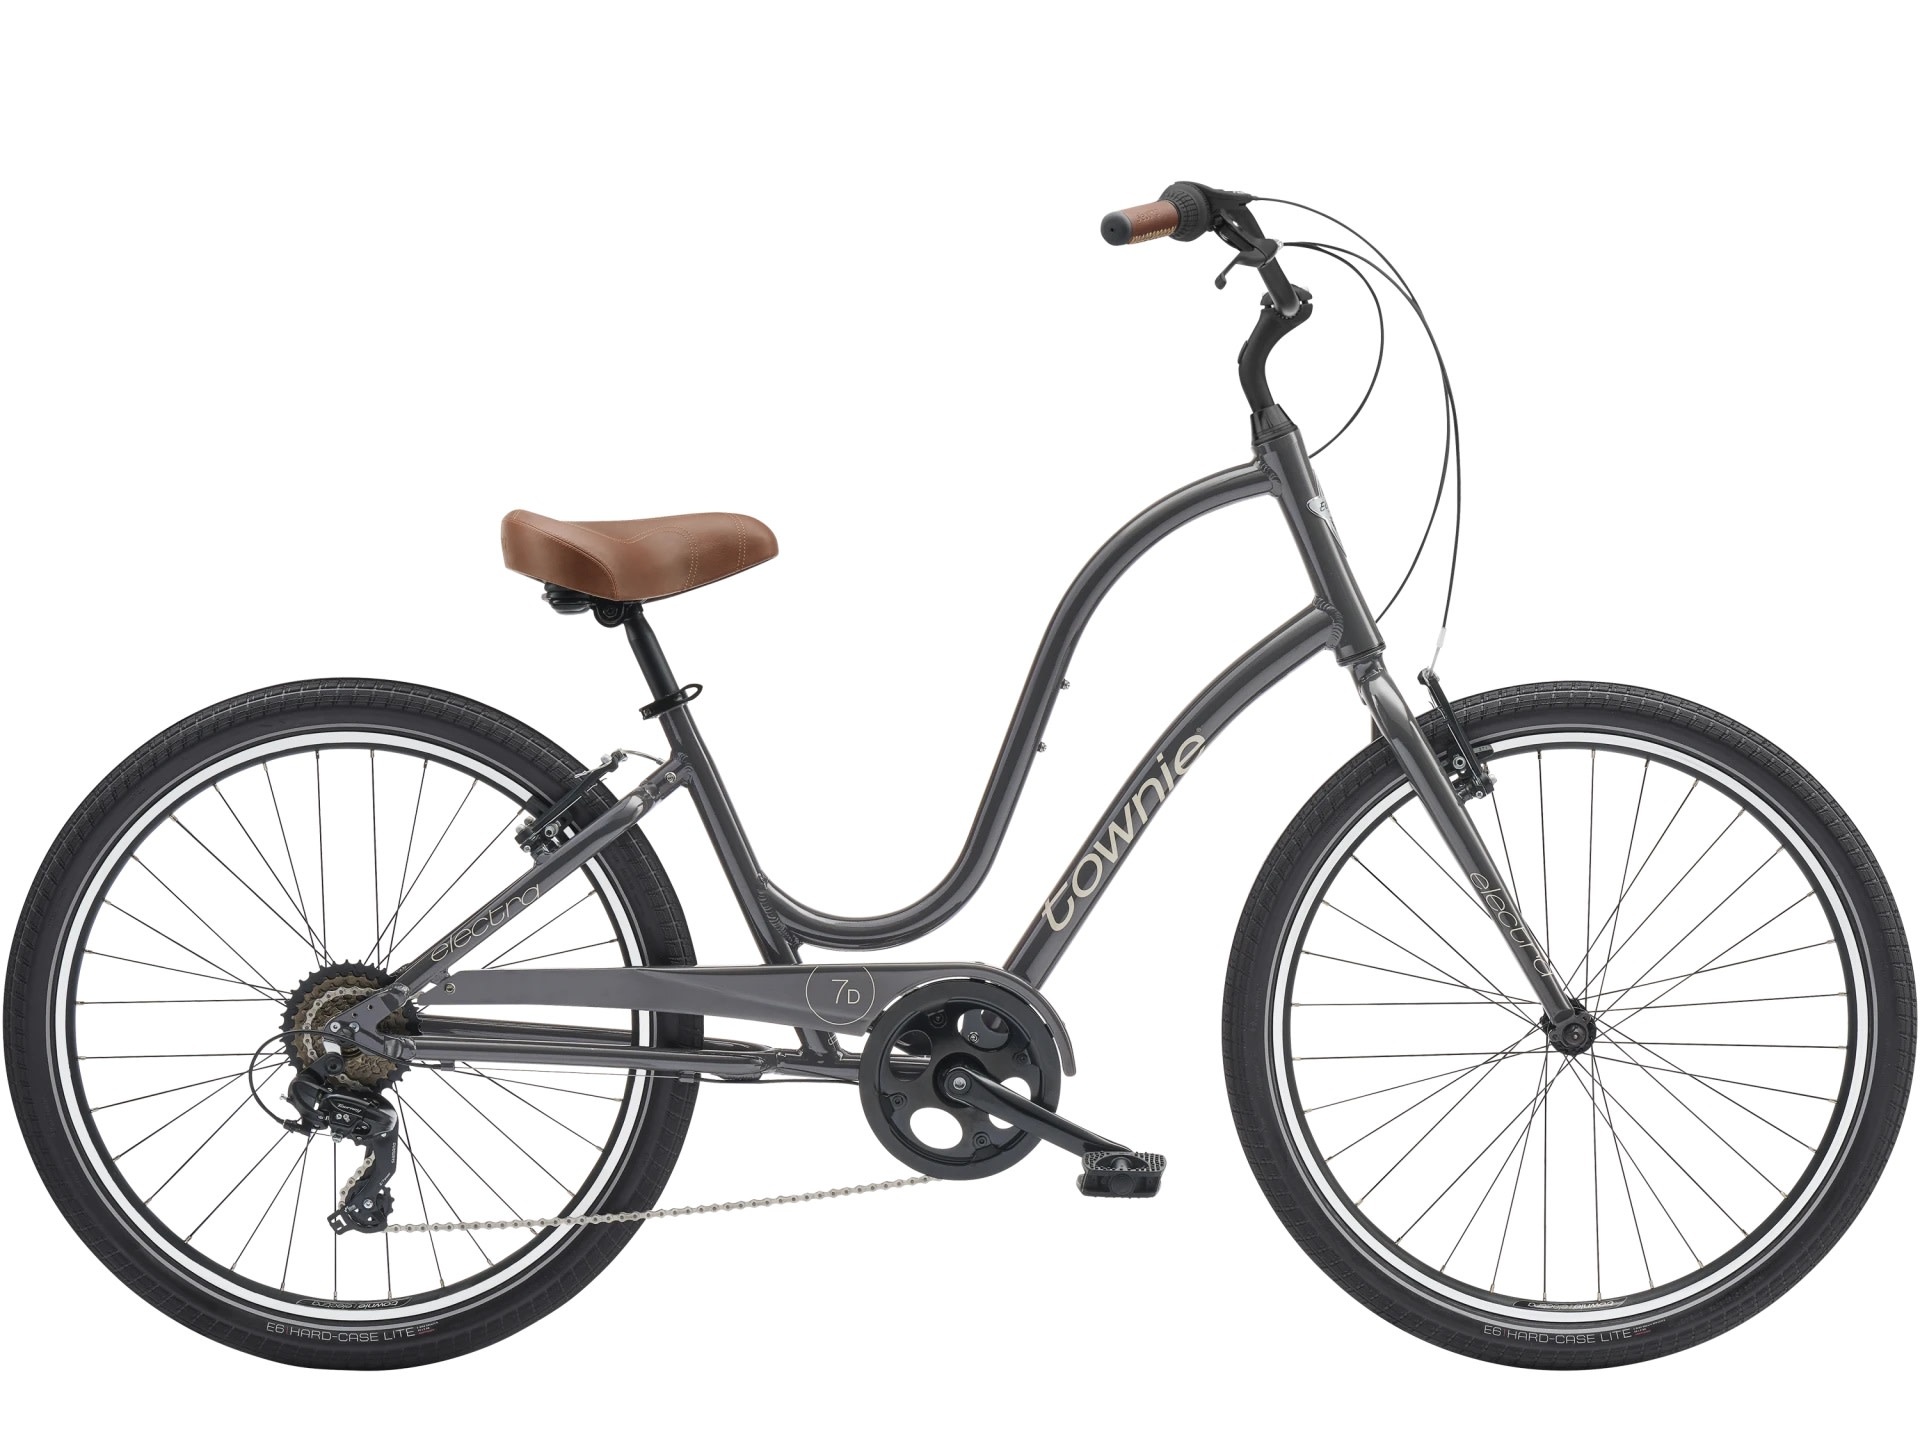 Electra Electra Townie 7D Step-Through